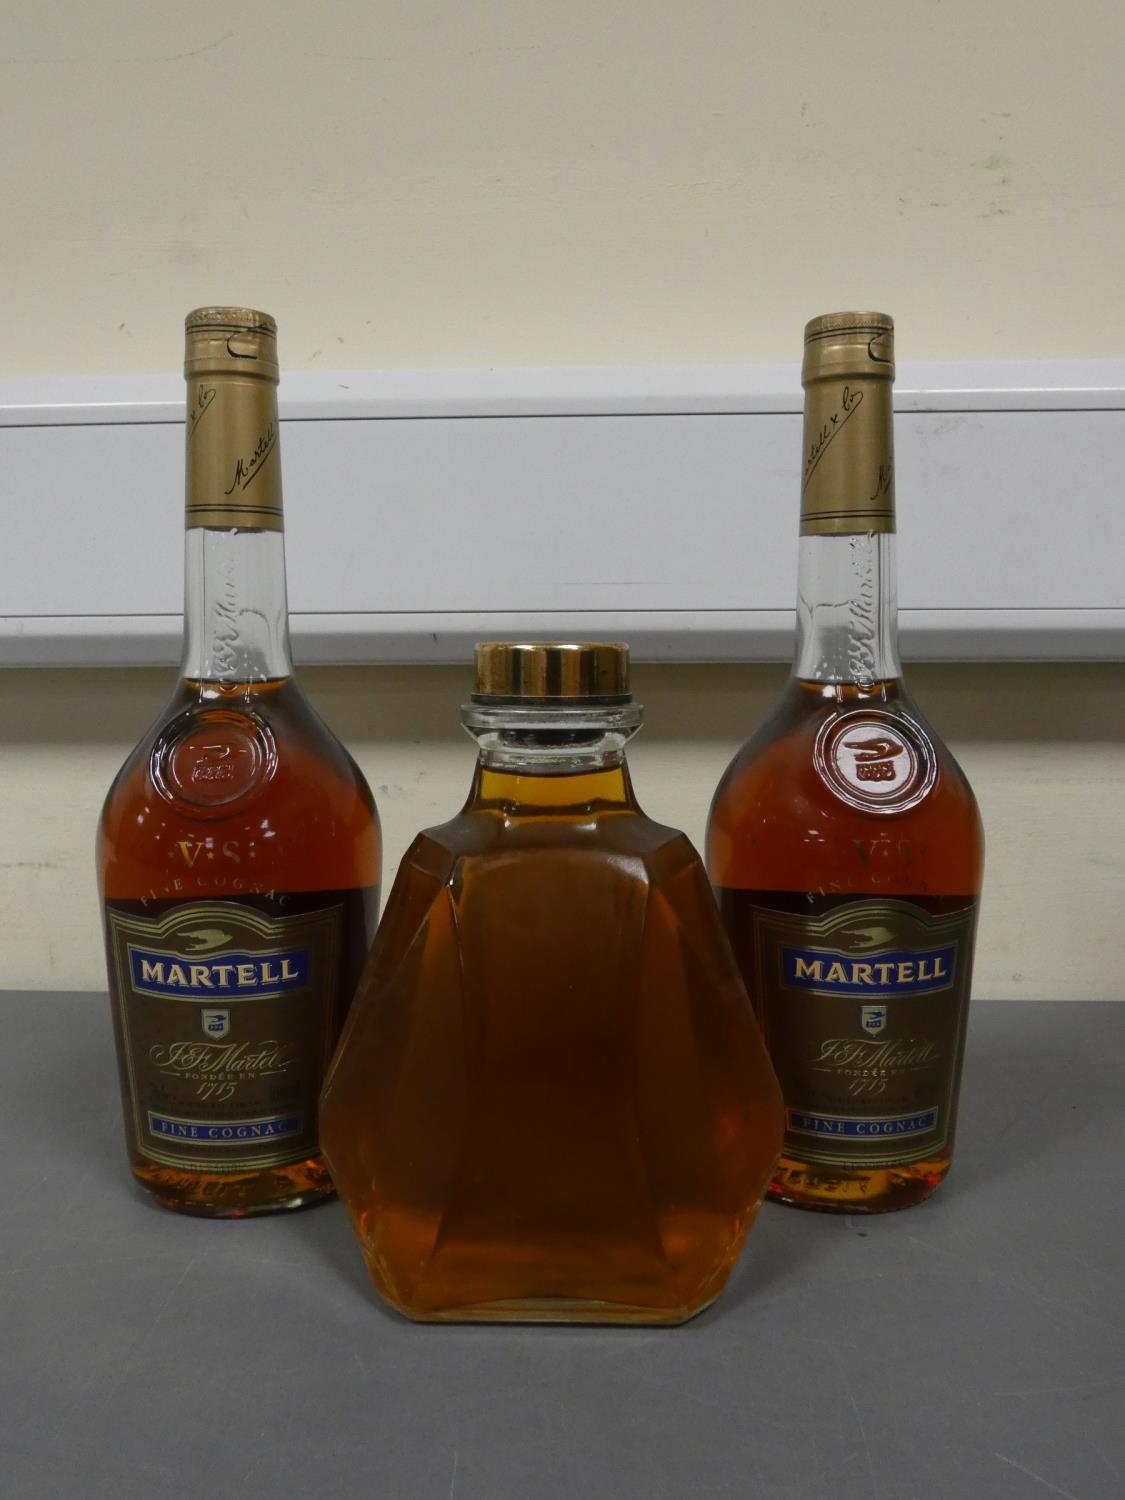 Two bottles of Martell V.S fine cognac, 70cl, 40% vol, with a glass decanter containing amber